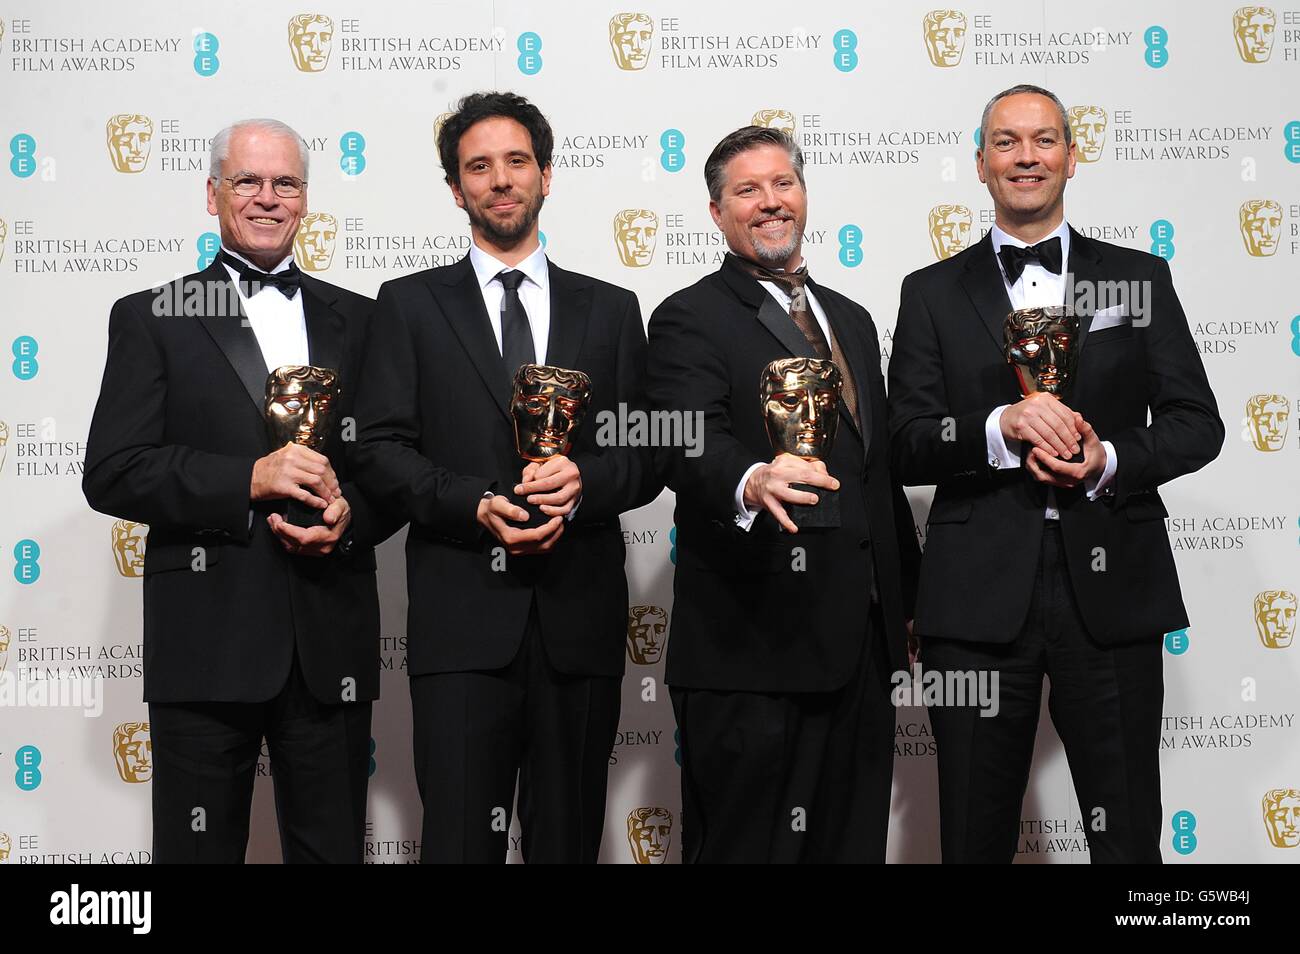 Donald r Elliot, Guillaume Rocheron, Bill Westenhofer and Erik-Jan De Boer with the award for Best Special Visual Effects for 'Life of Pi' in the press room at the 2013 British Academy Film Awards at the Royal Opera House, Bow Street, London. Stock Photo